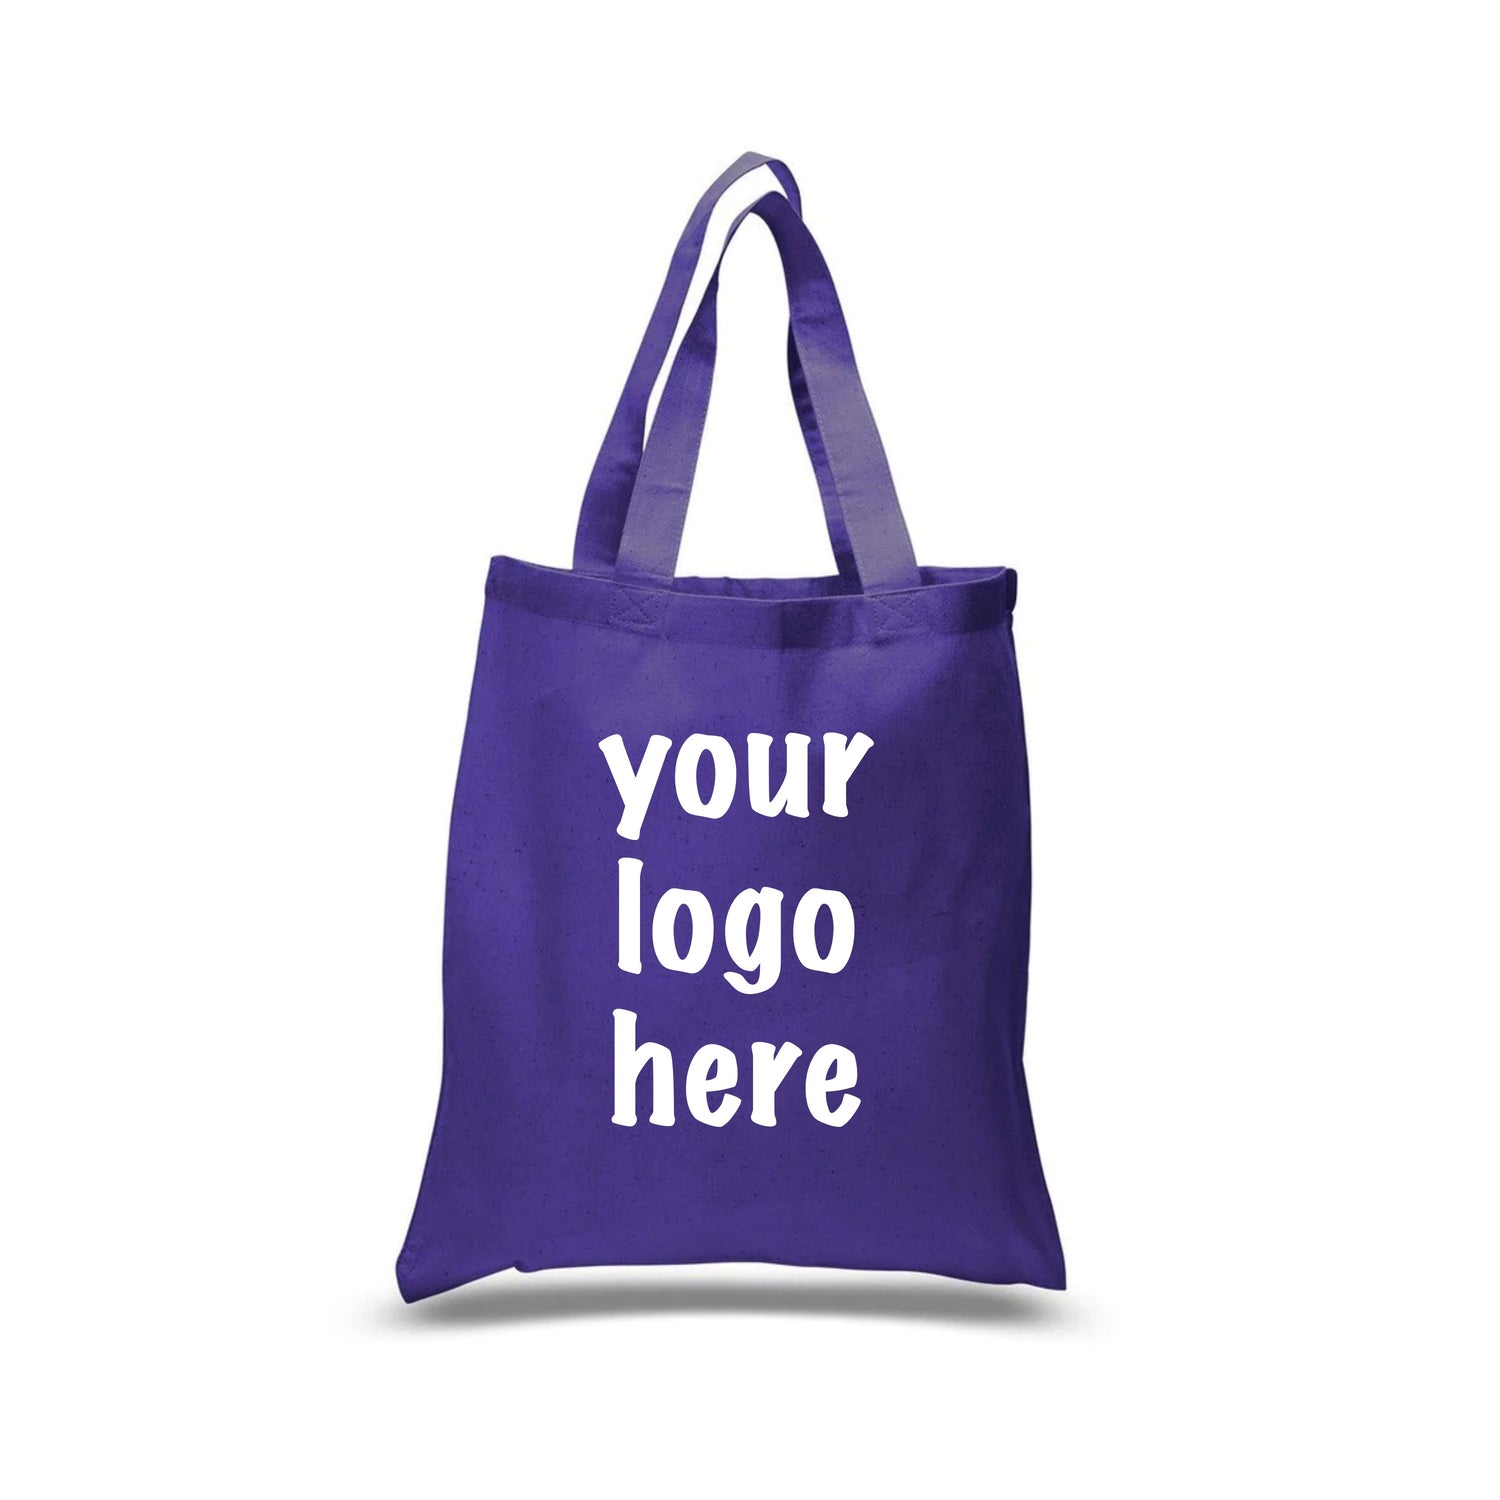 Custom Printed Canvas Tote Bags, Personalized Drawstring Backpacks Wholesale